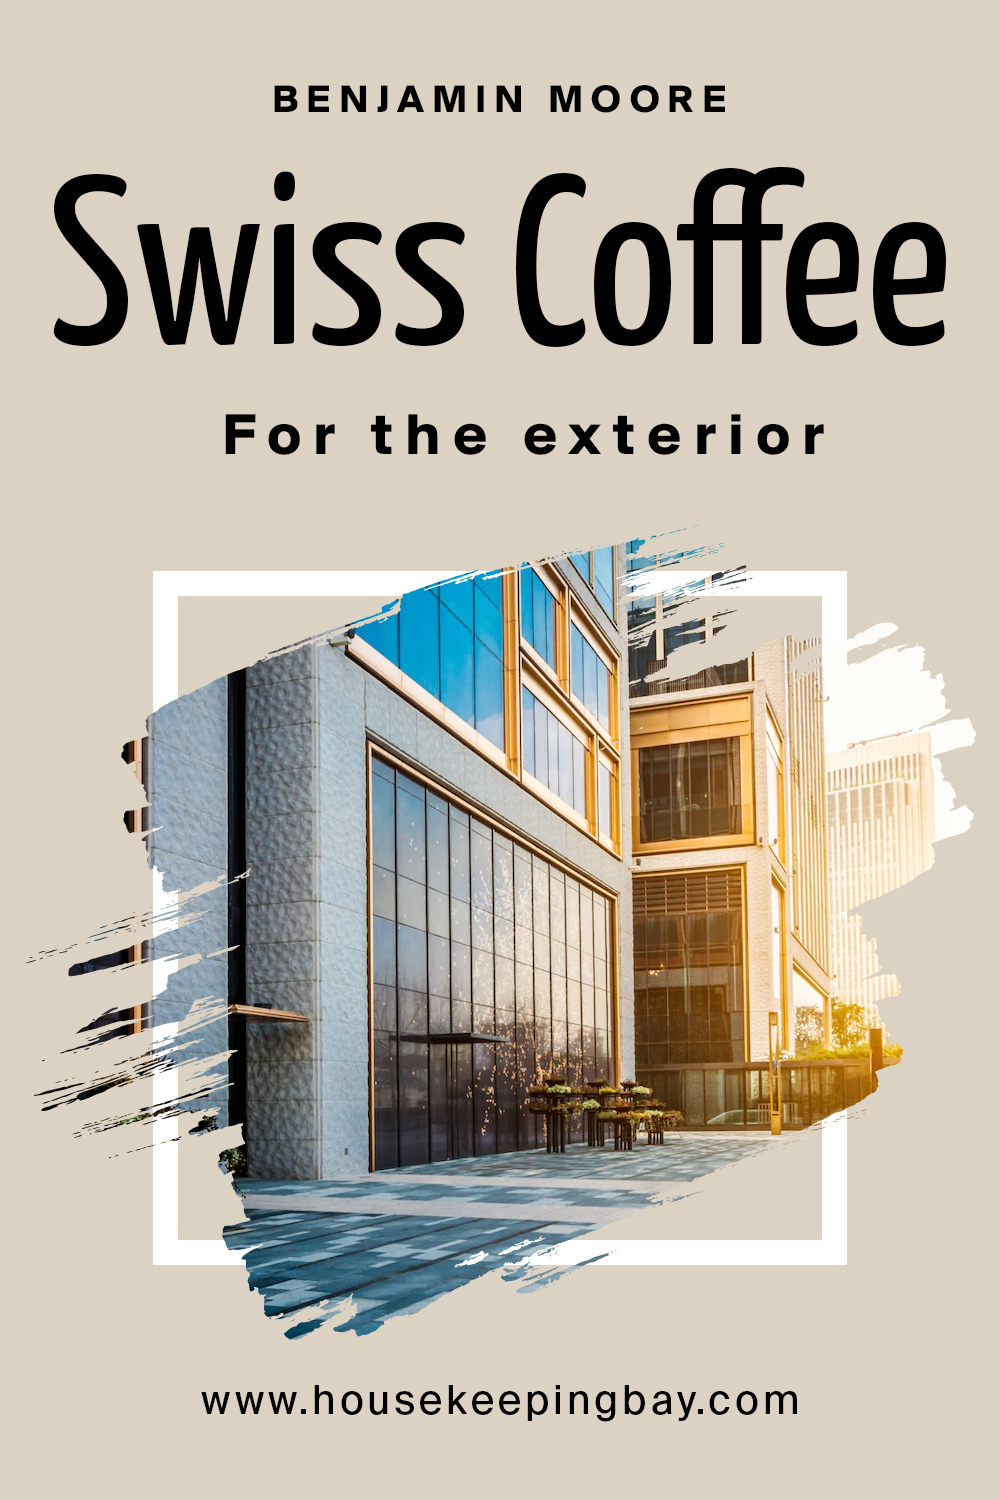 swiss coffee oc-45 by benjamin moore for the exterior